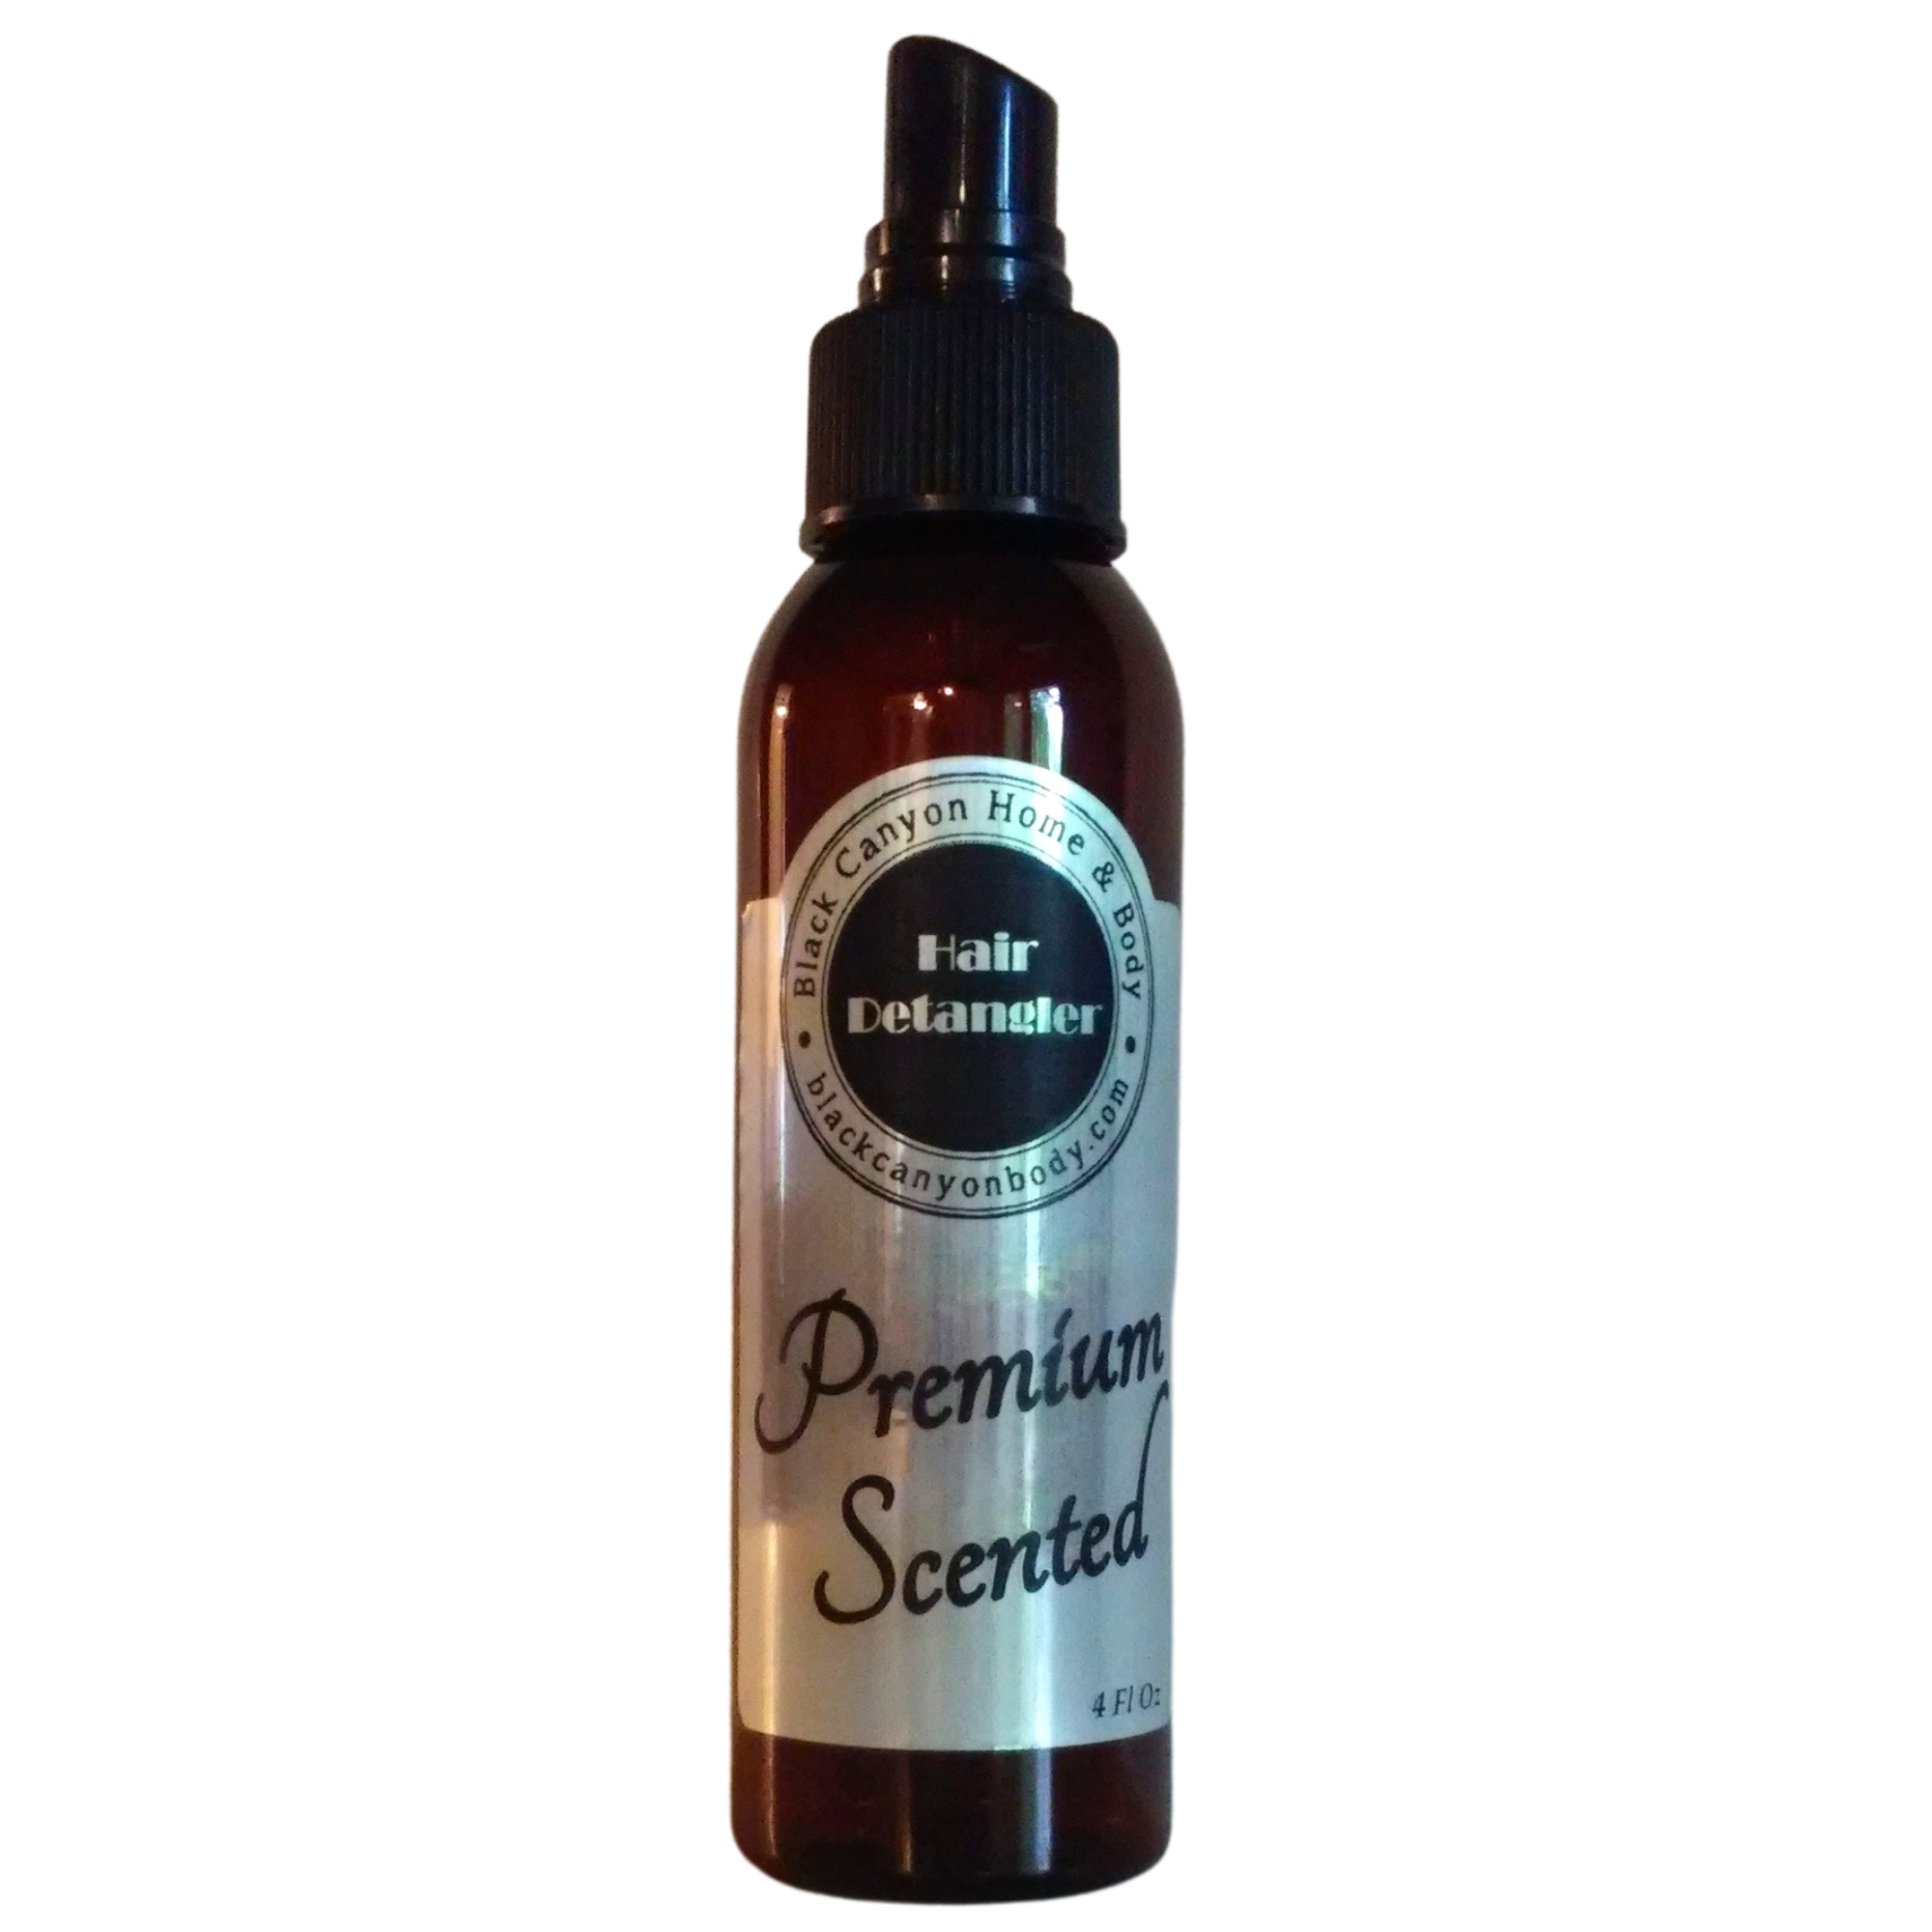 Black Canyon Berry & Orange Blossom Scented Hair Detangler Spray with Olive Oil